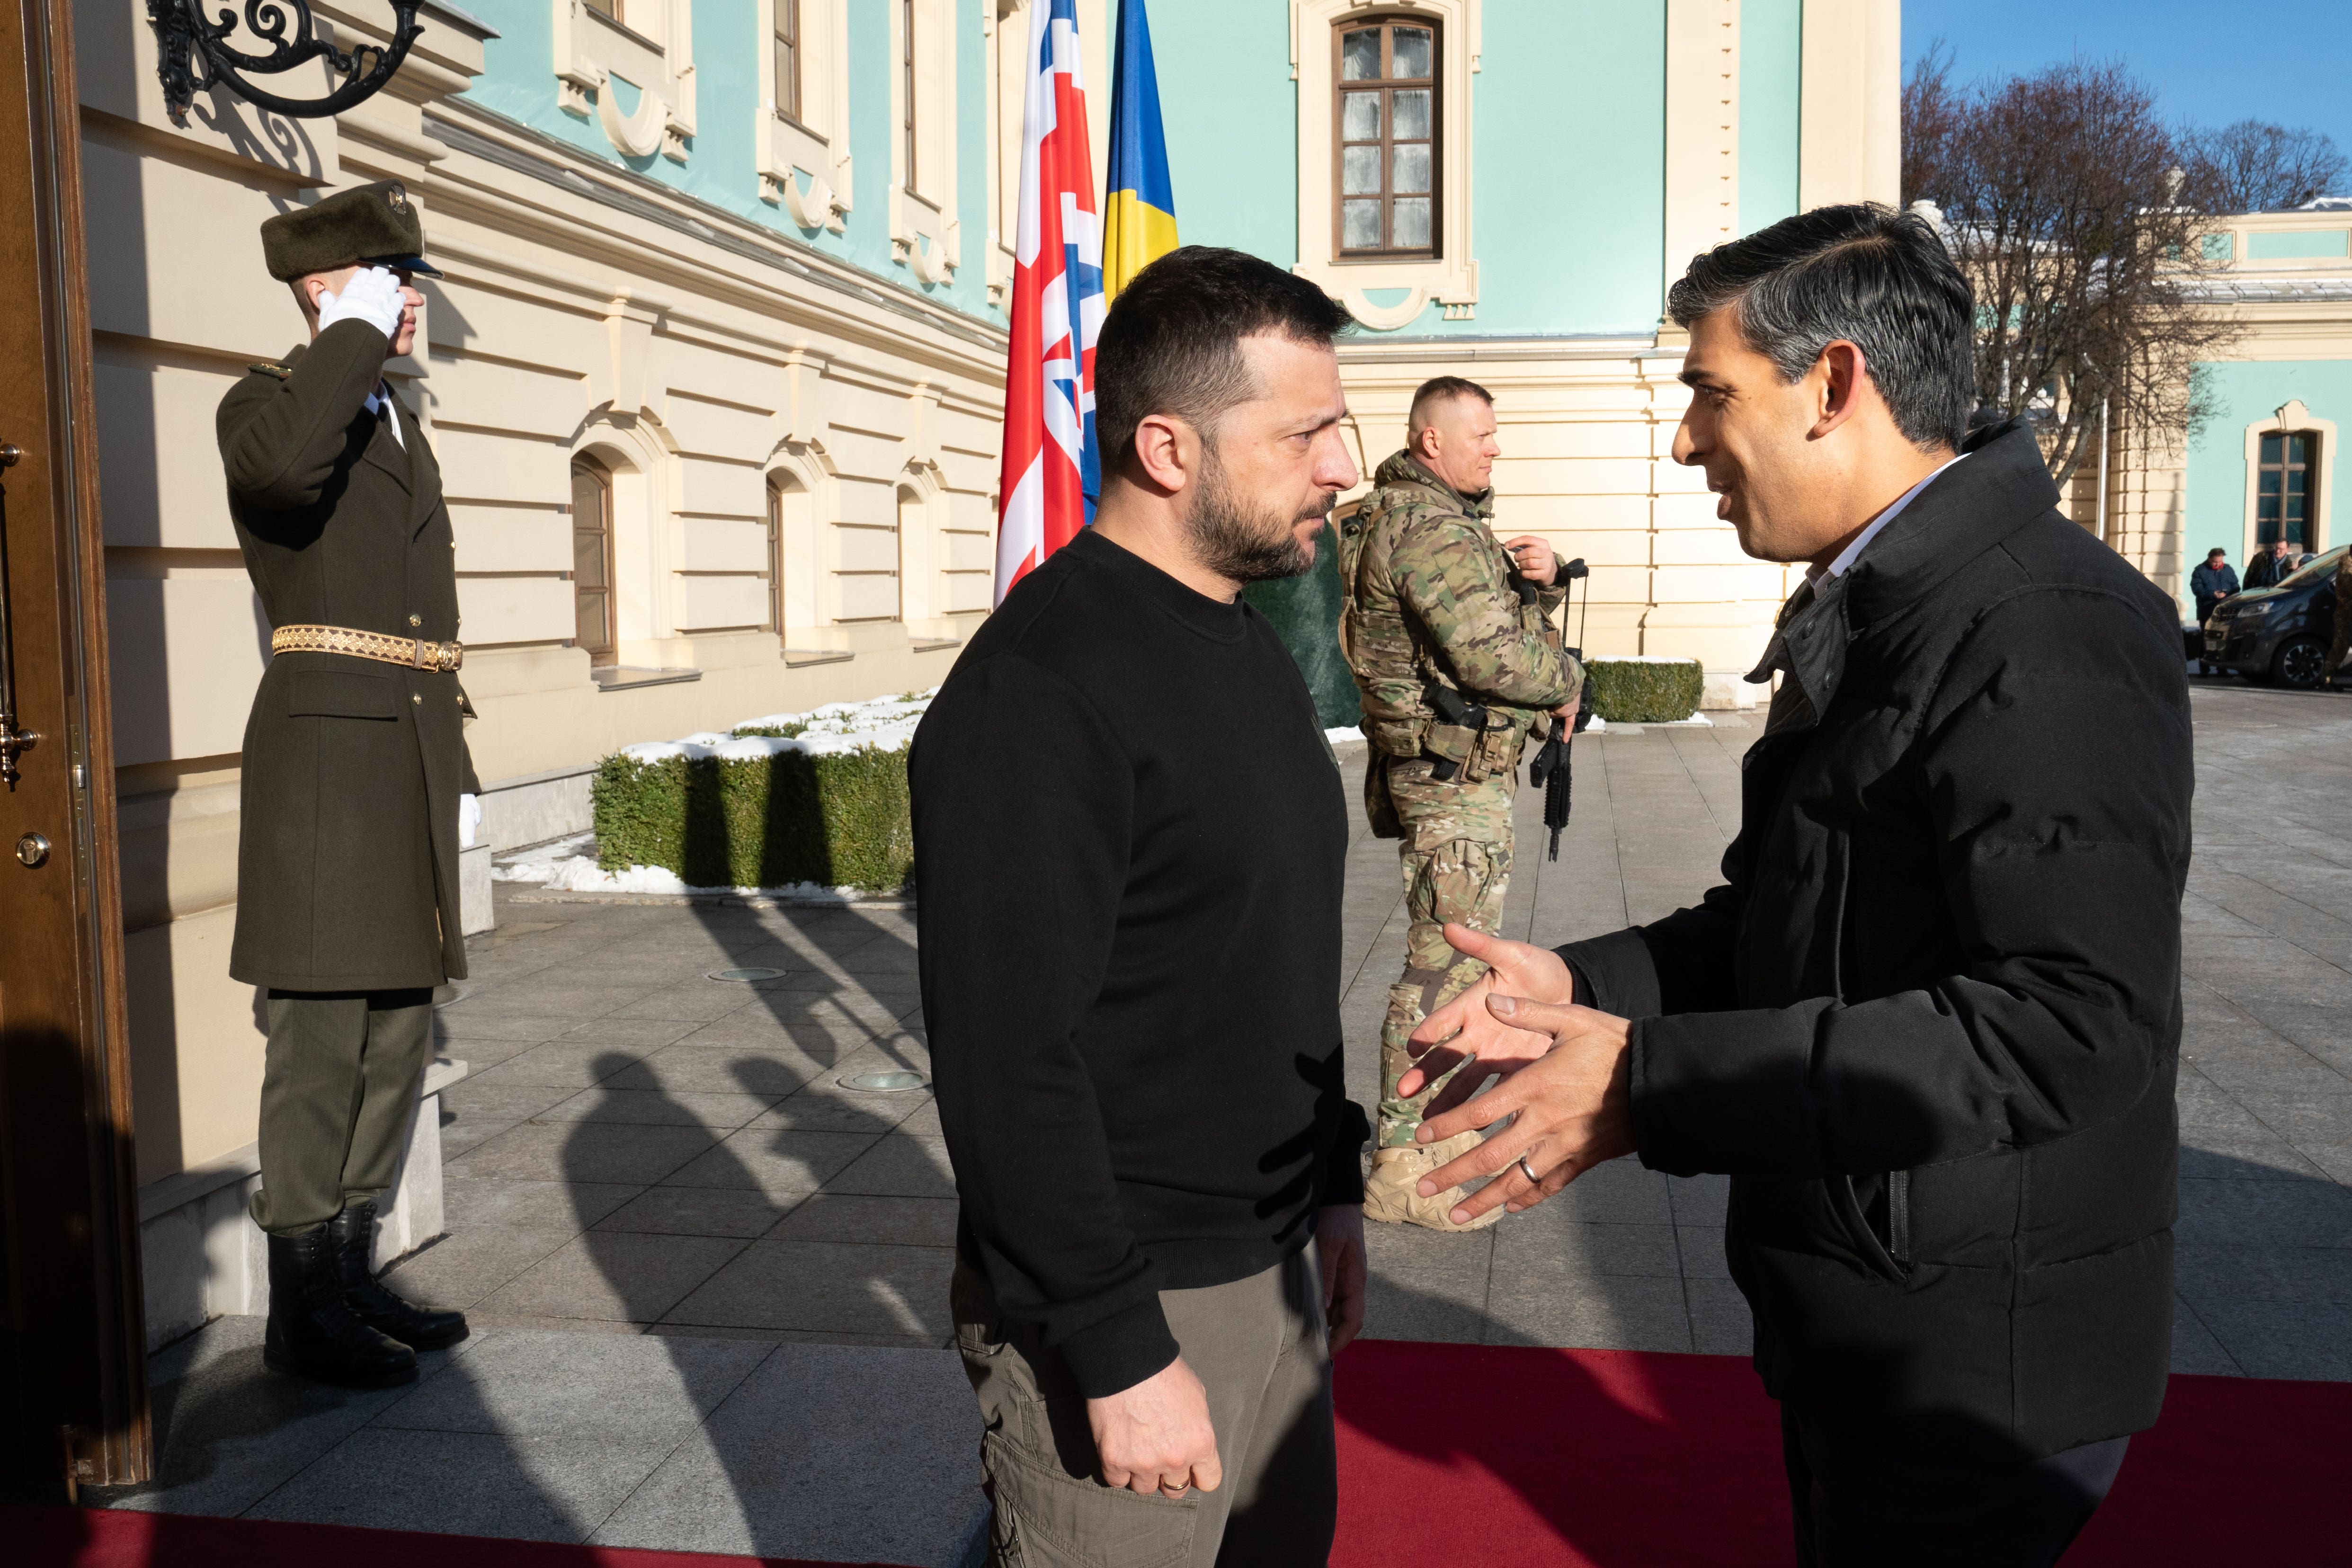 Prime Minister Rishi Sunak is welcomed by President Volodymyr Zelensky during a visit to the Presidential Palace in Kyiv (Stefan Rousseau/PA)